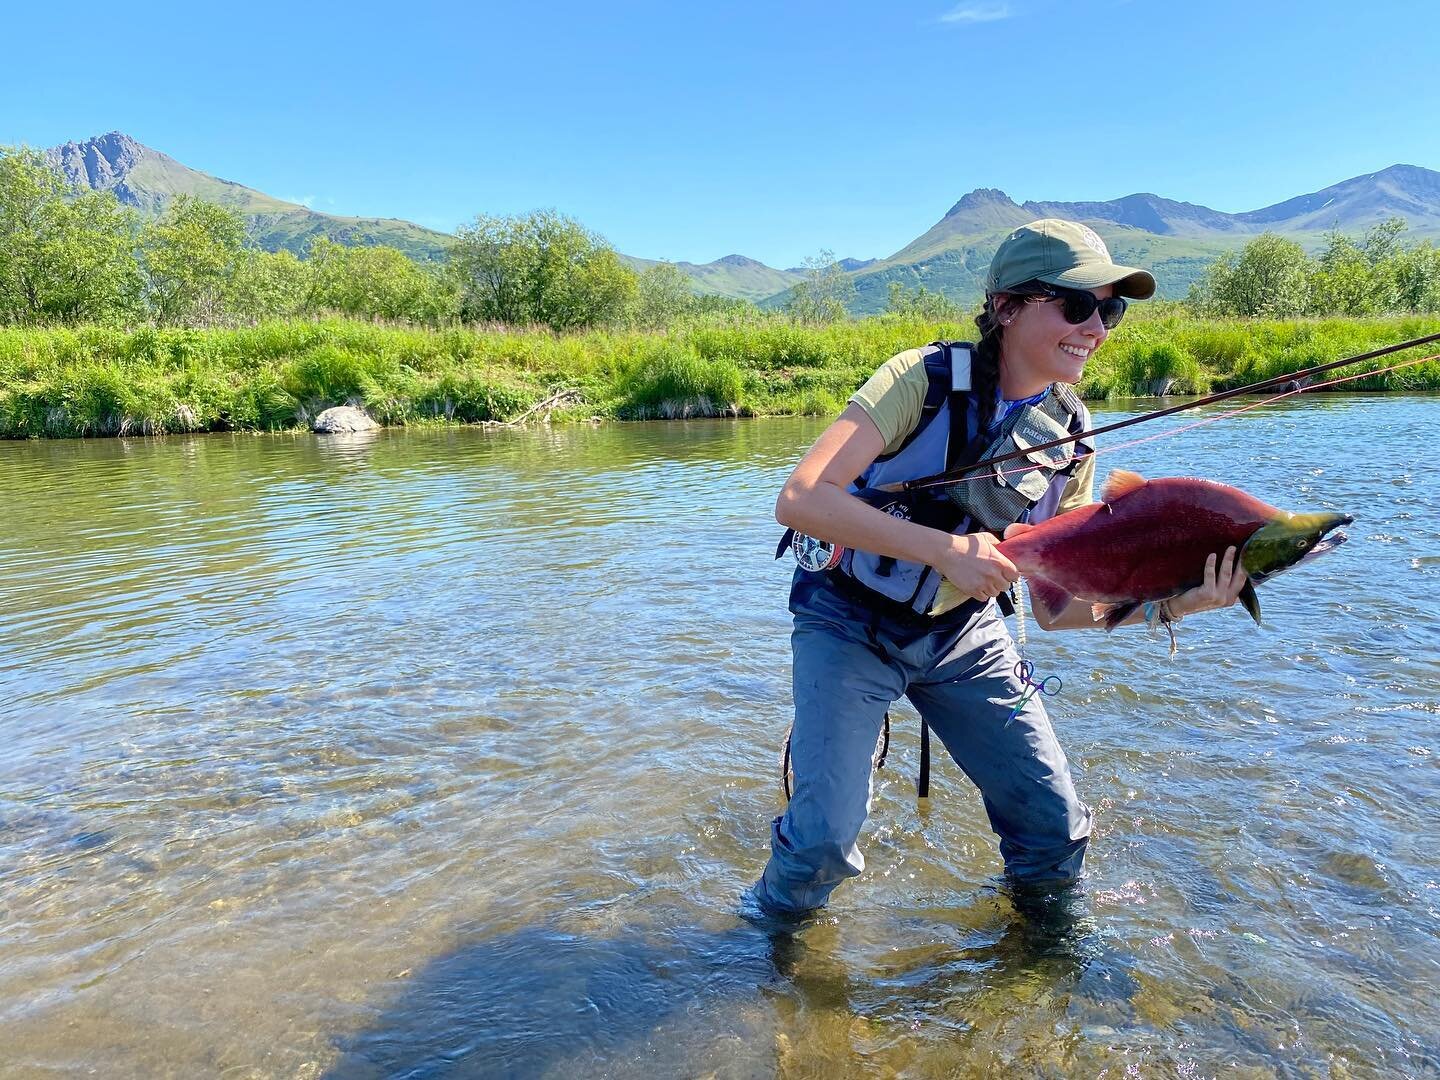 Good news! We added more late July dates for 2022!
#goodnews #goodnewsriver  #riverrafting #flyfishing #alaskaflyfishing #keepemwet #catchandrelease #silversalmon #alaska #salmonfishing #alaskafishing #troutunlimited #ouzel #ouzelexpeditions